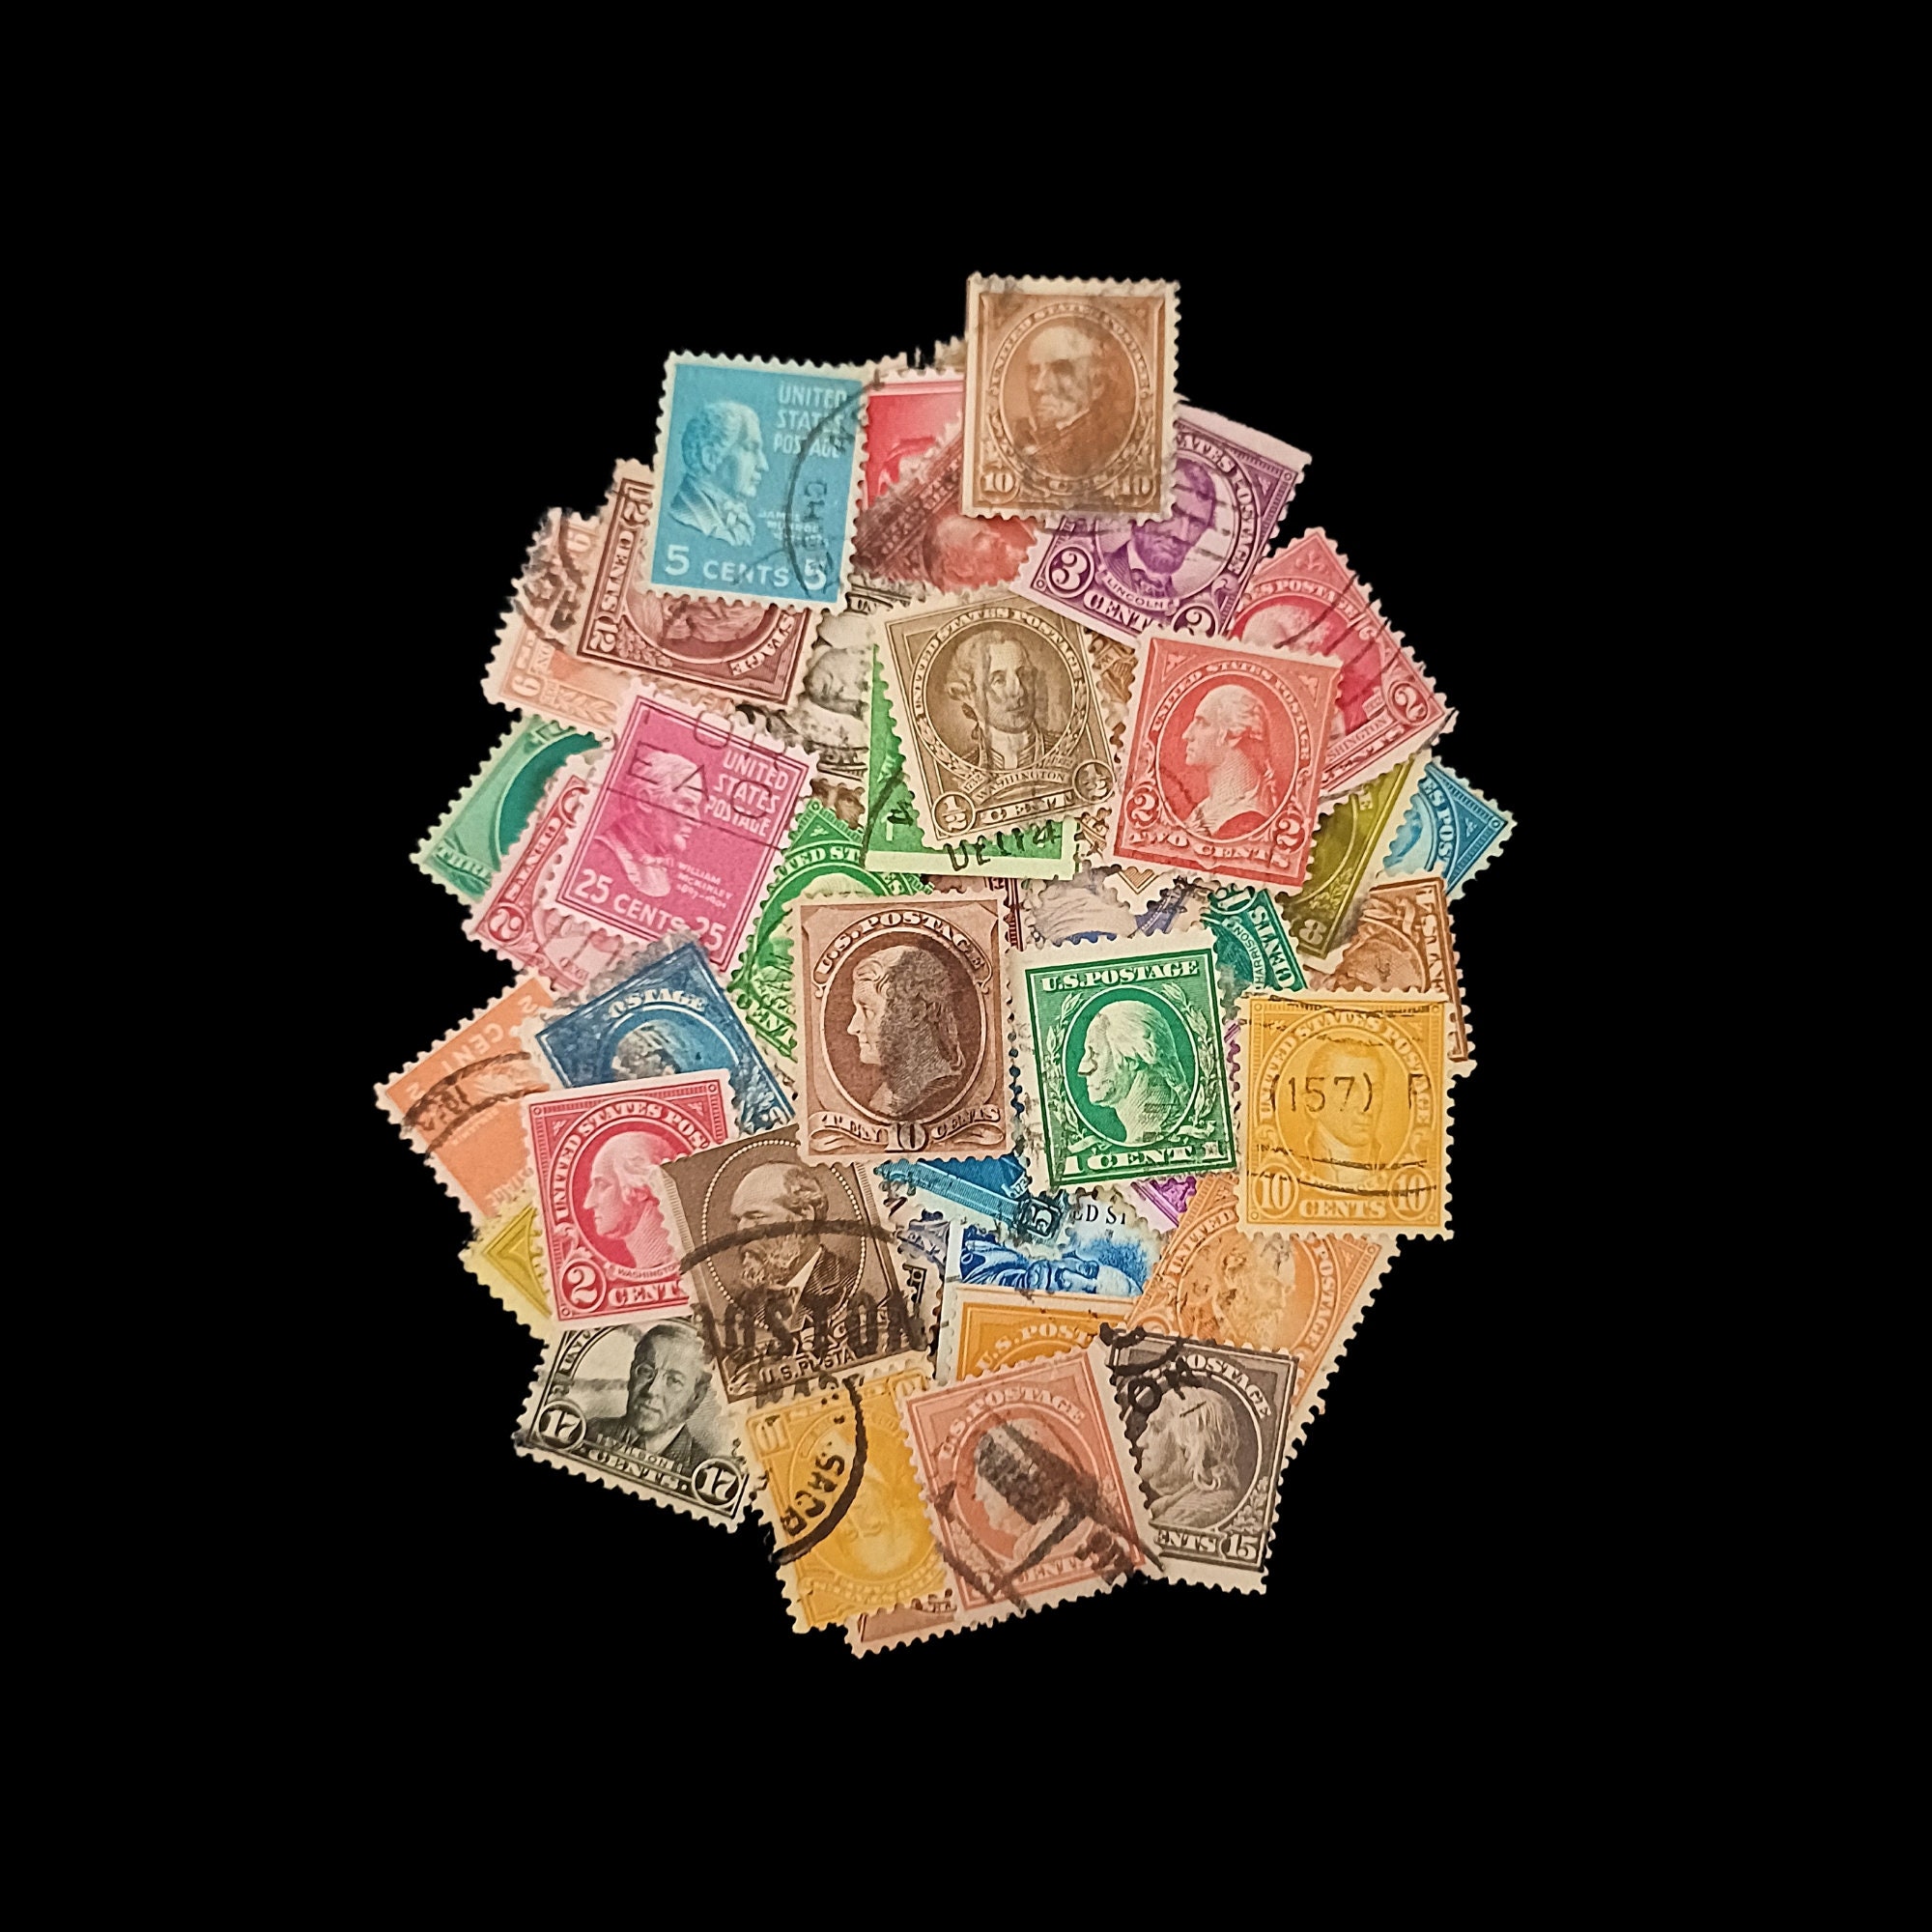 New to Stamp Collecting